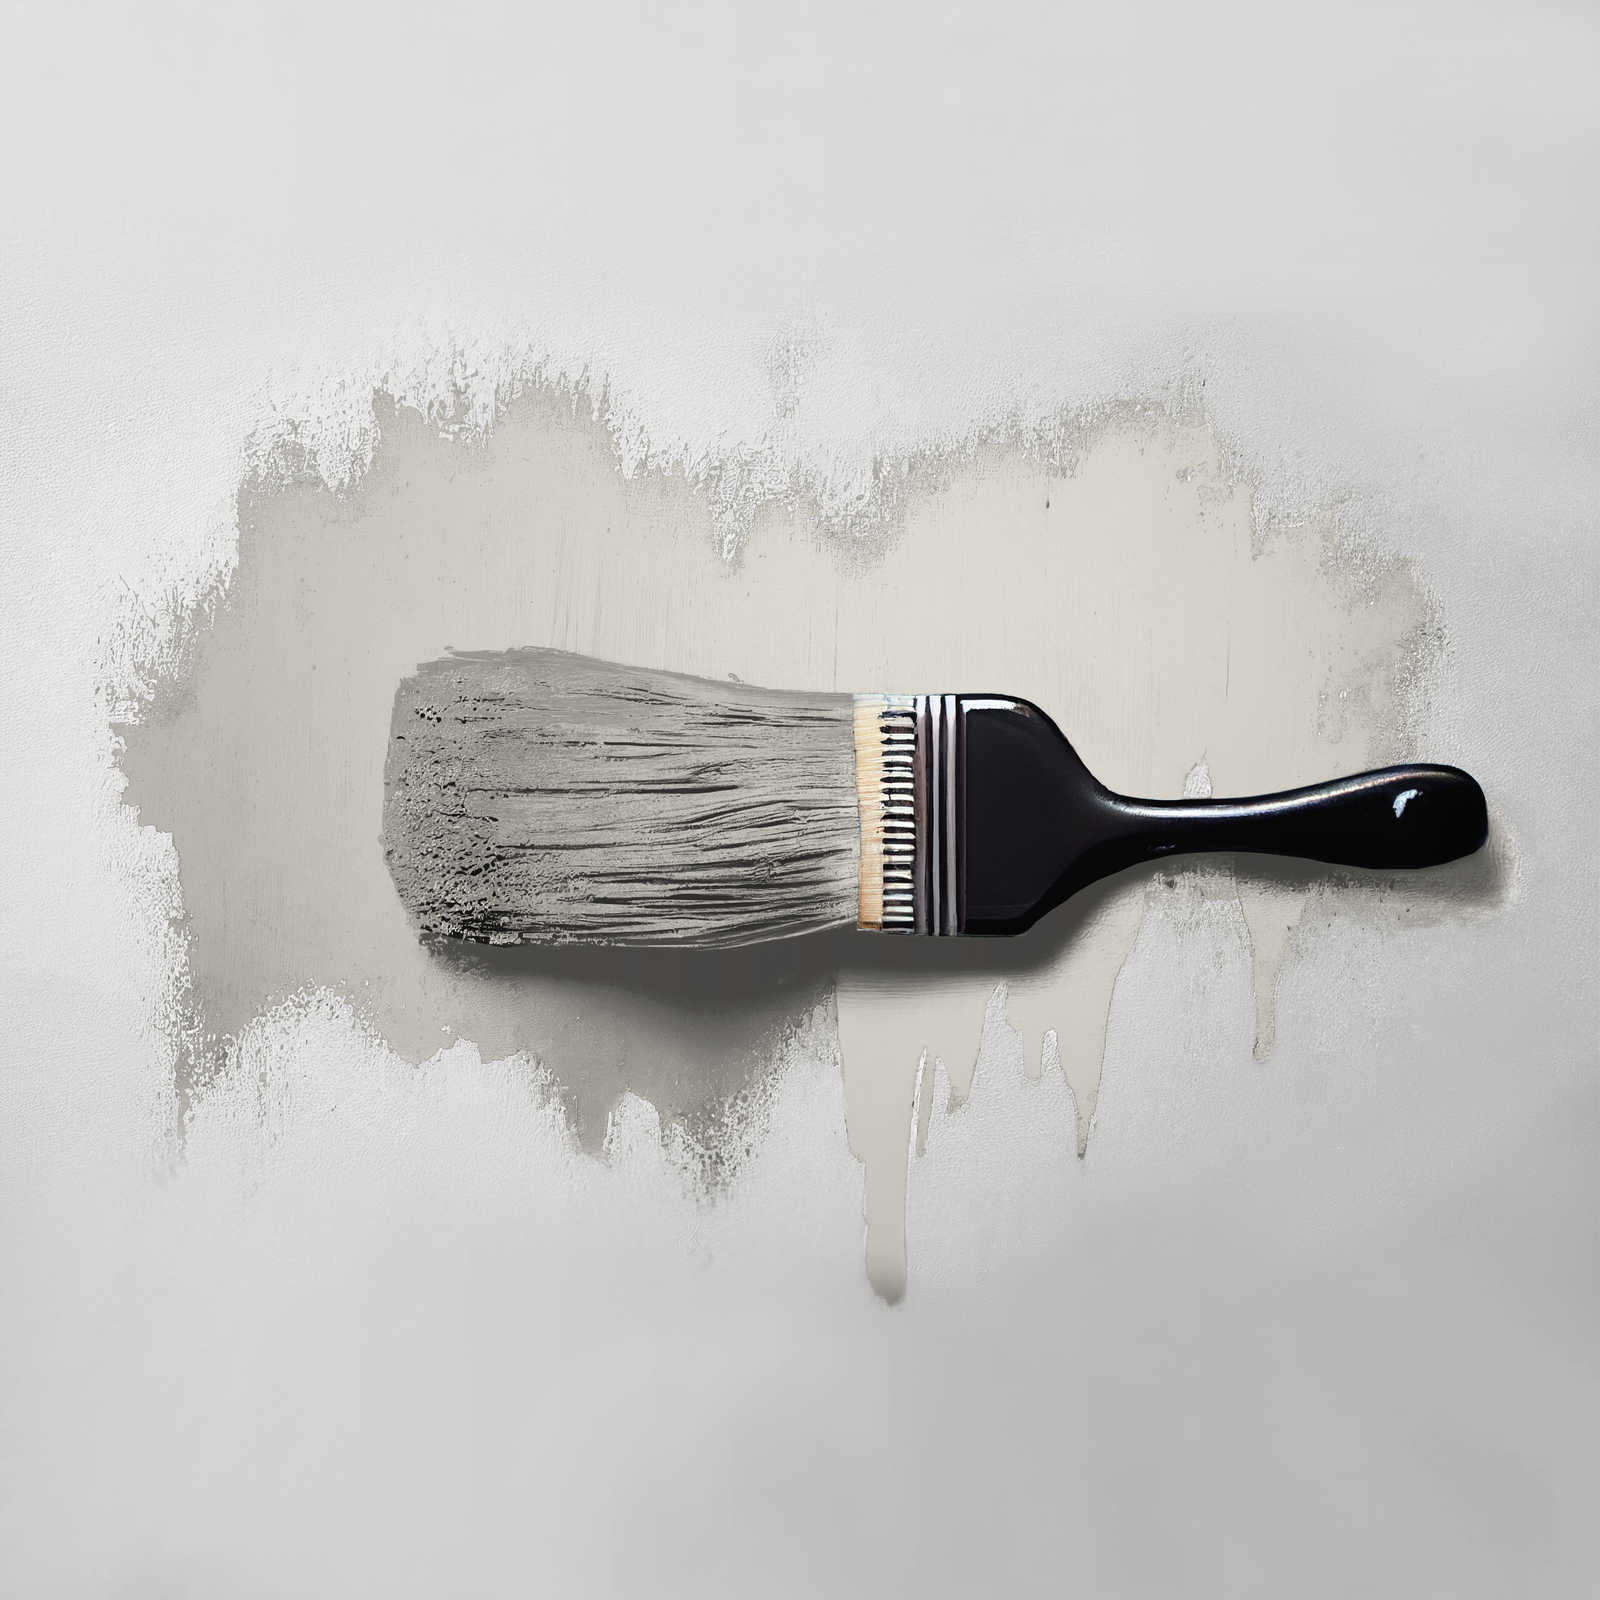             Wall Paint TCK1016 »Opened Oyster« in soft grey – 5.0 litre
        